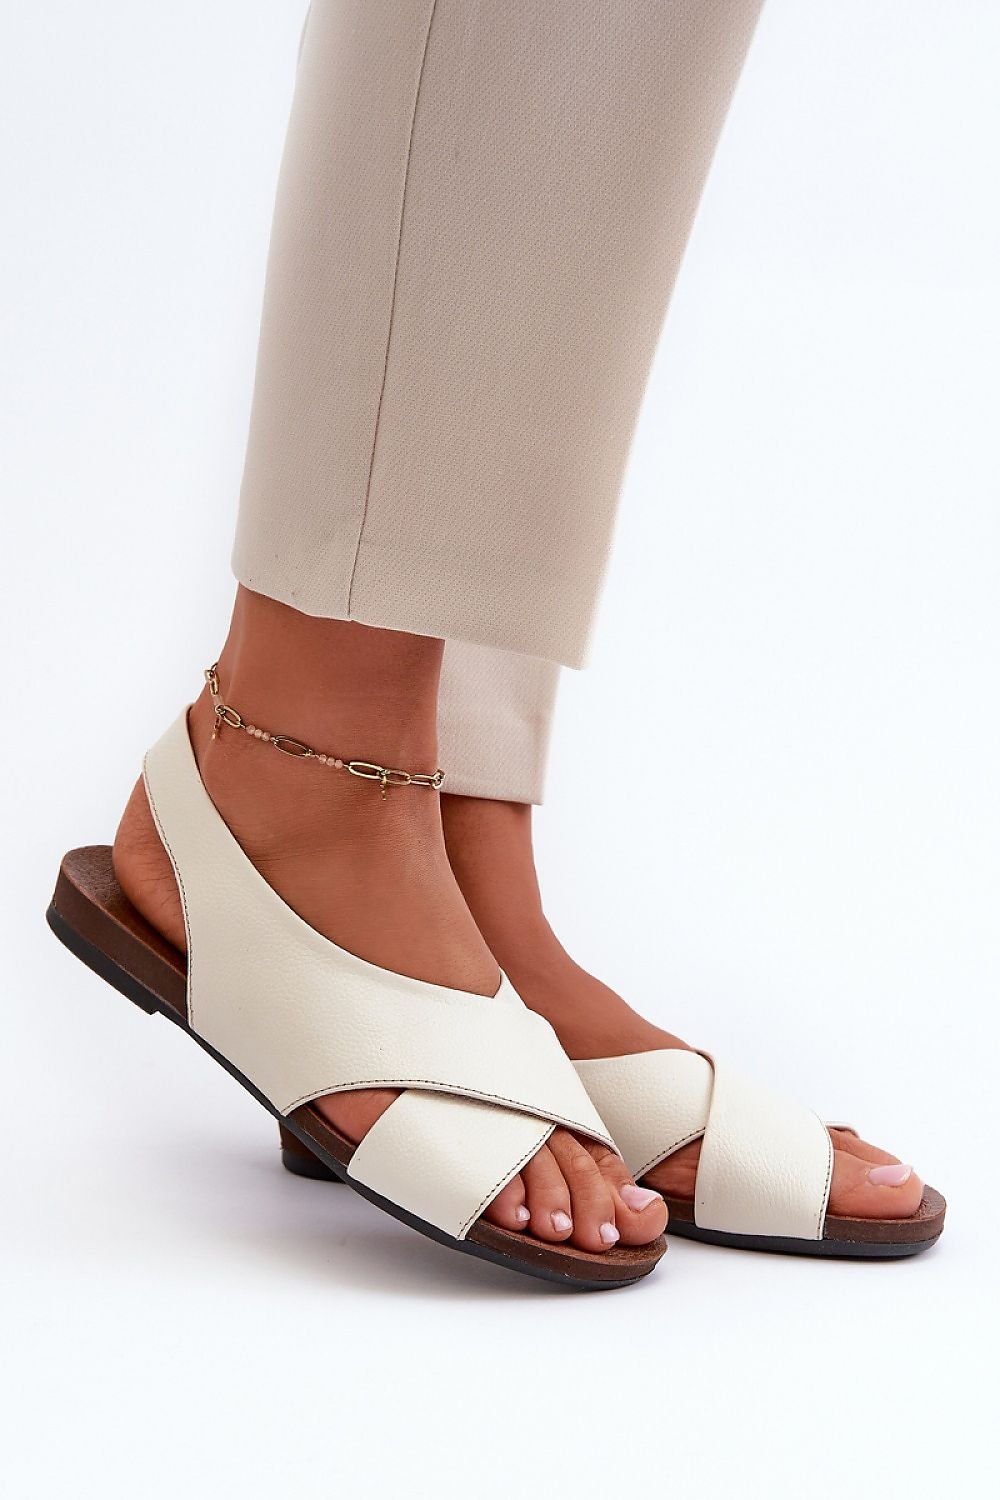 Sandals model 198729 Step in style